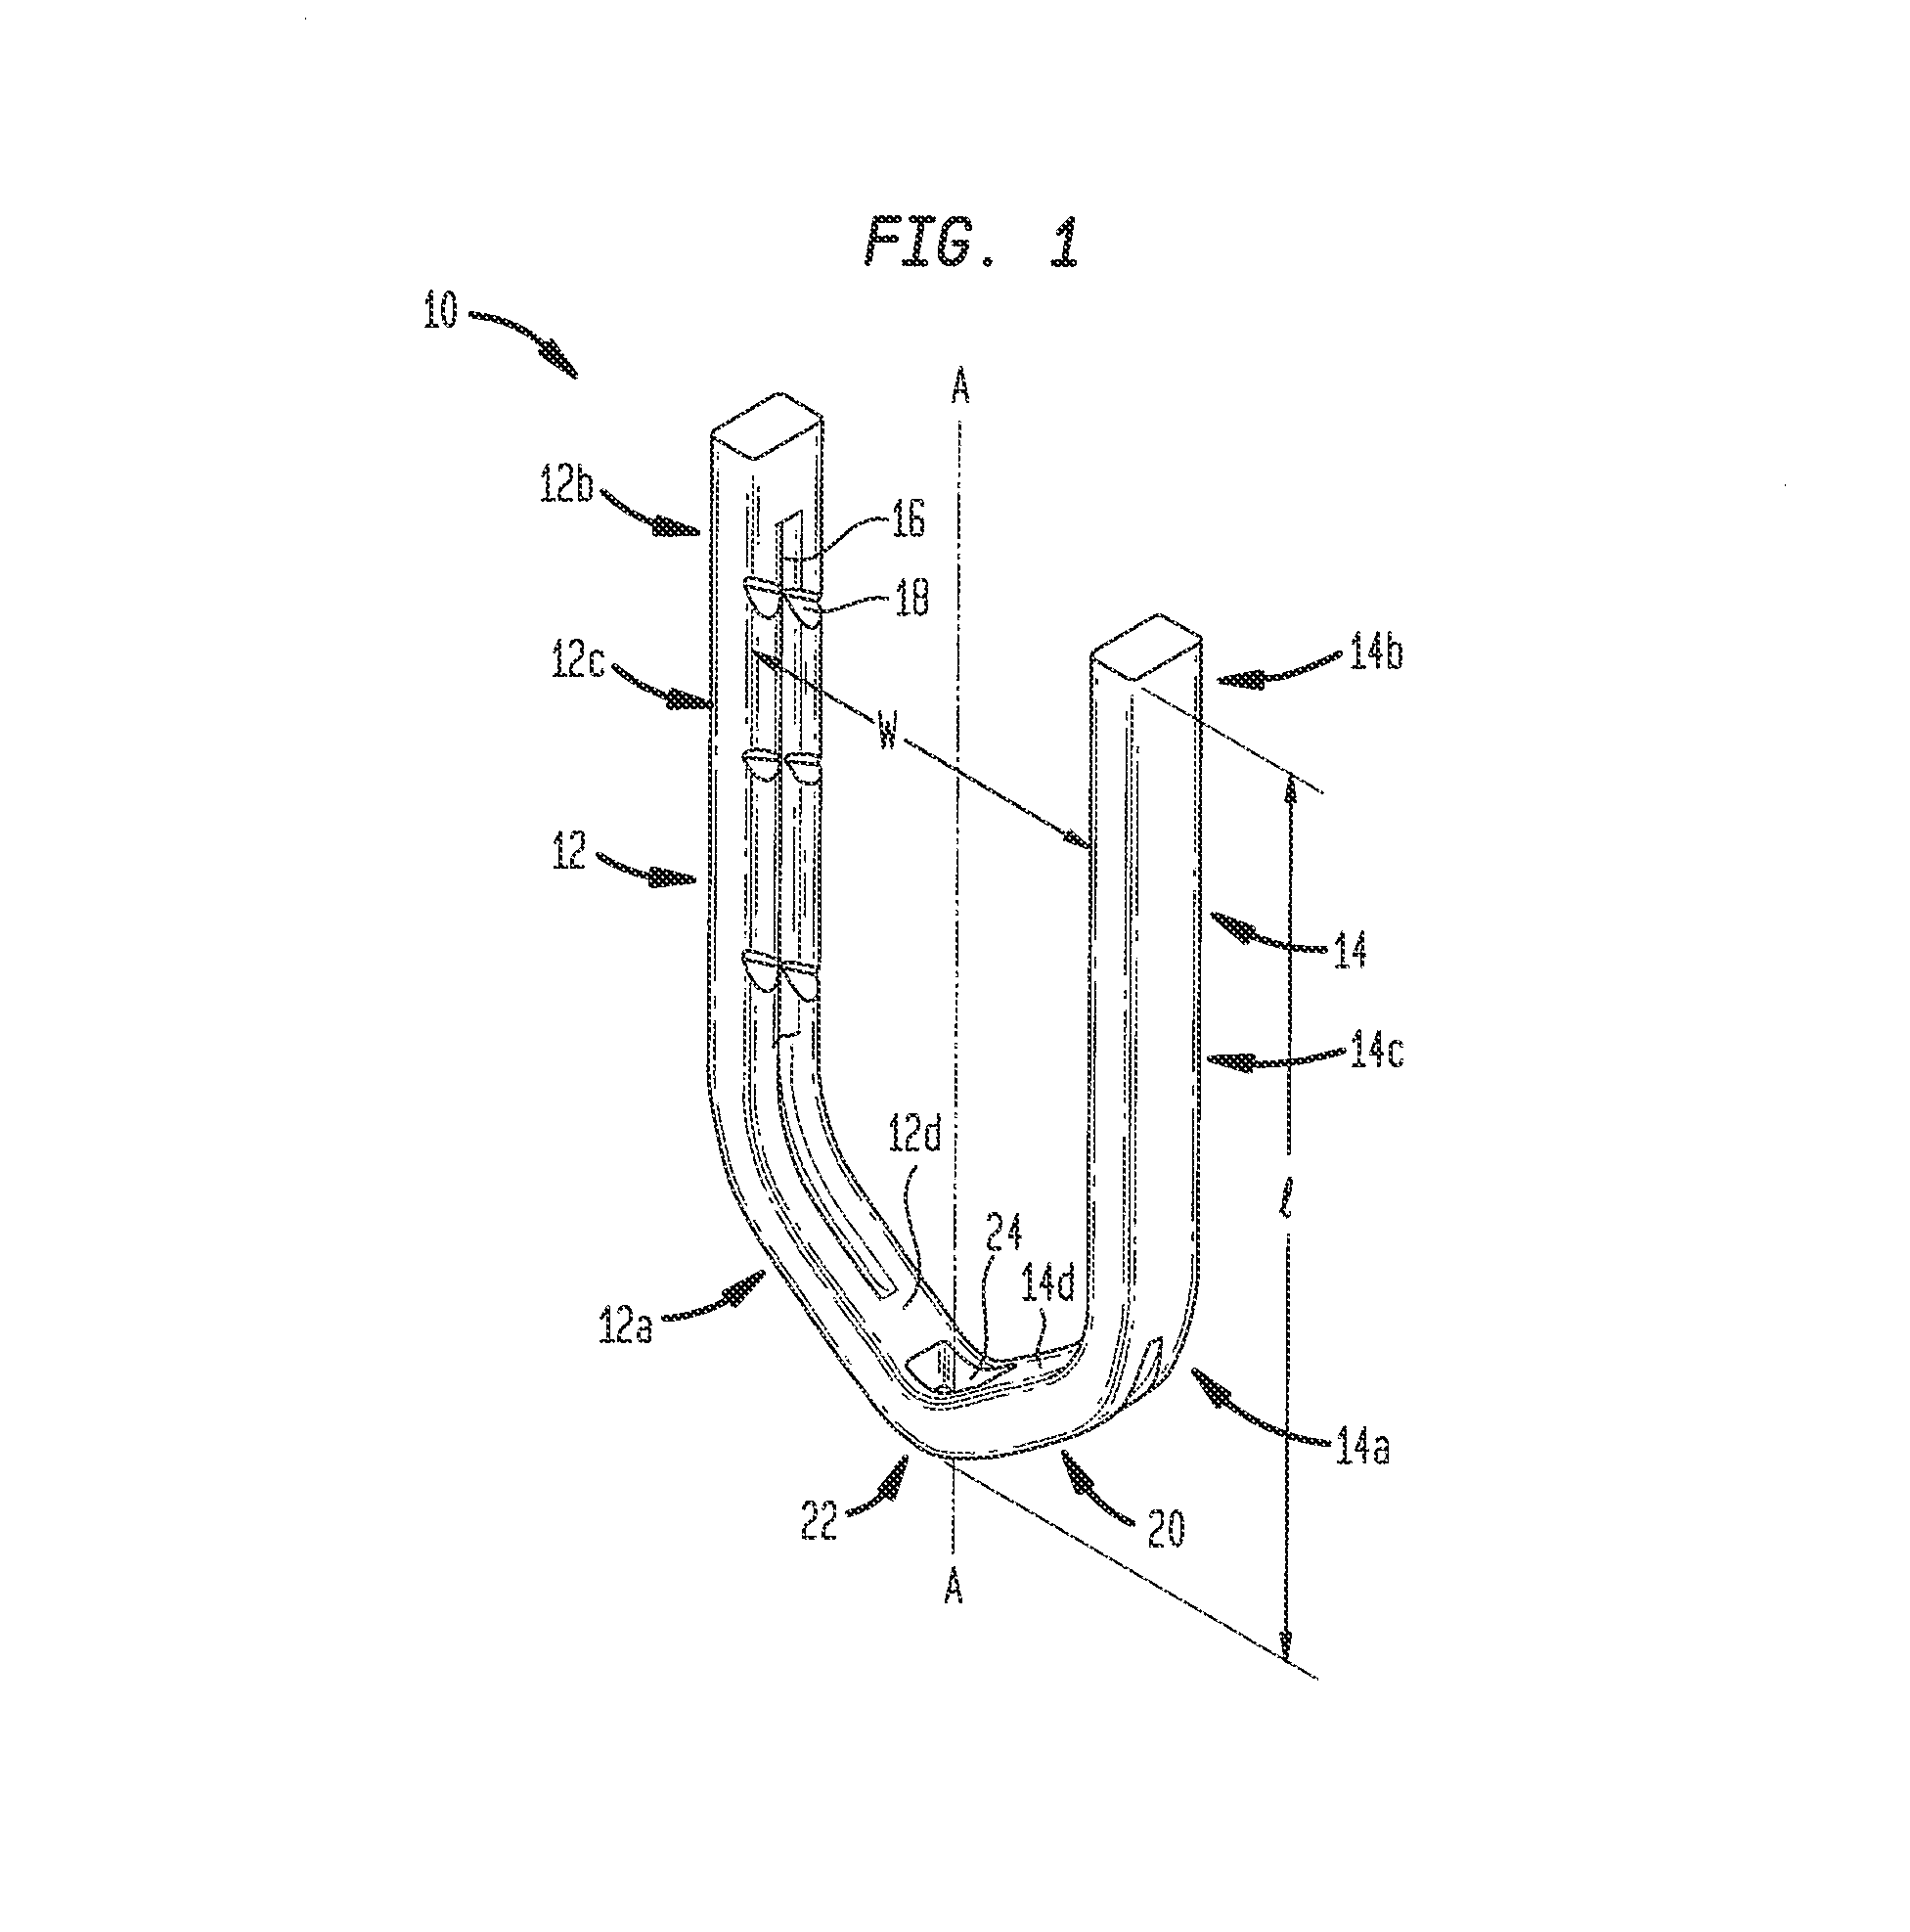 Method For Applying A Surgical Clip Having A Compliant Portion